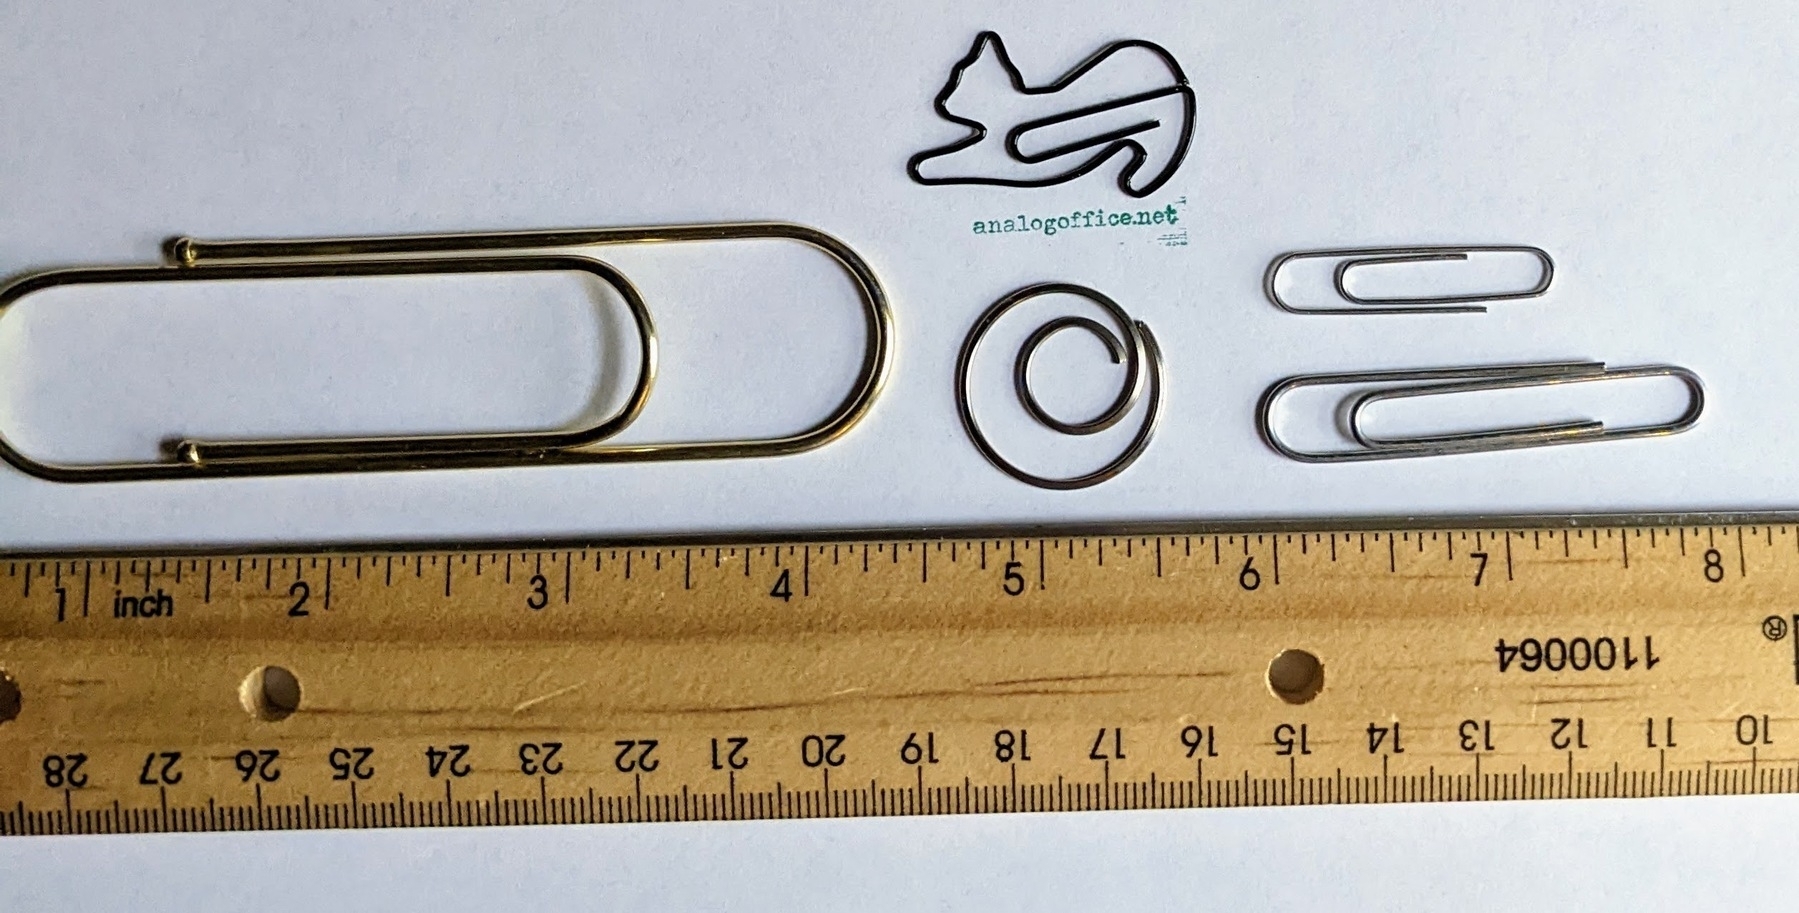 a large novelty paper clip next to a spiral-shaped paper clip, a paper clip shaped like a cat, and a small and large normal paper clip